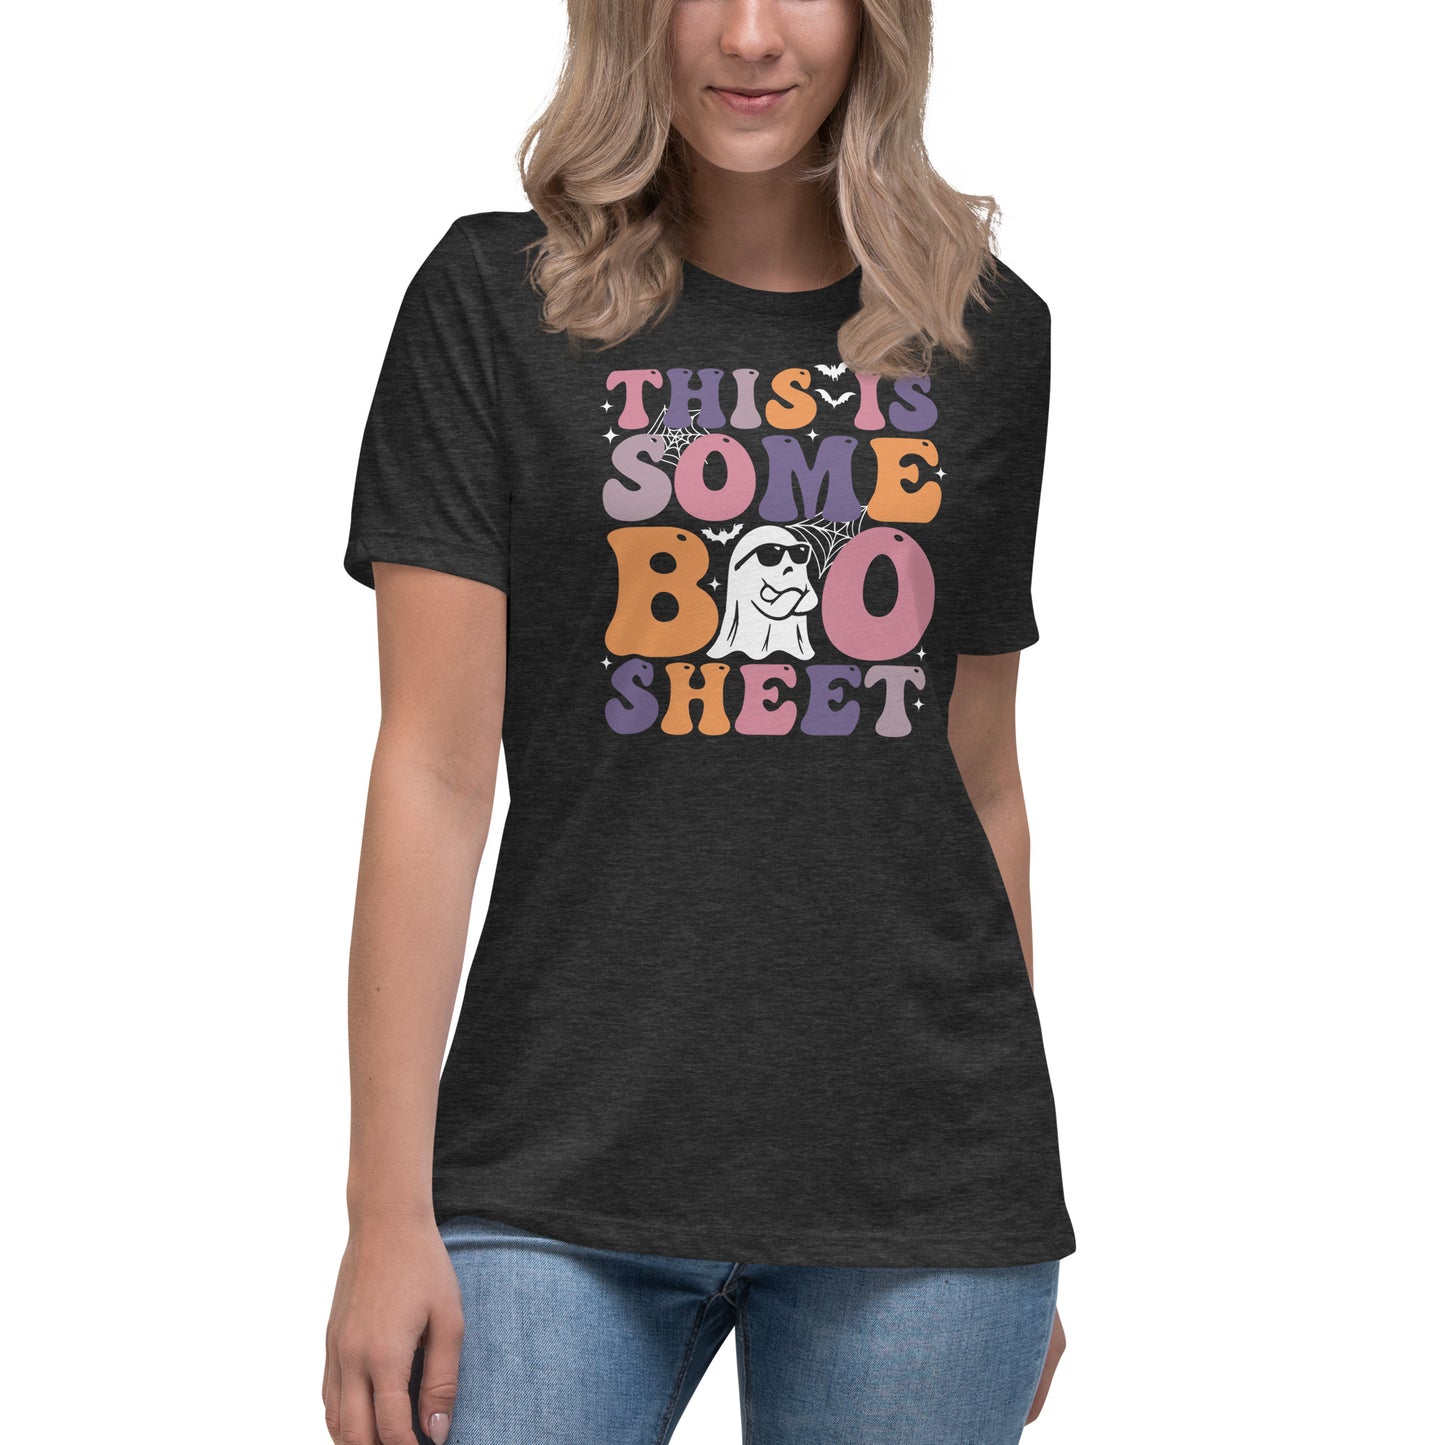 Elevate Your Halloween Style with 'This Is So Boo Sheet' Women's T-Shirt - Fun Halloween Tee, Spooky Season Shirt, October Wardrobe, Funny Halloween Costume, Festive Apparel, Ghostly Humor, Unique Design, October Fashion for Women